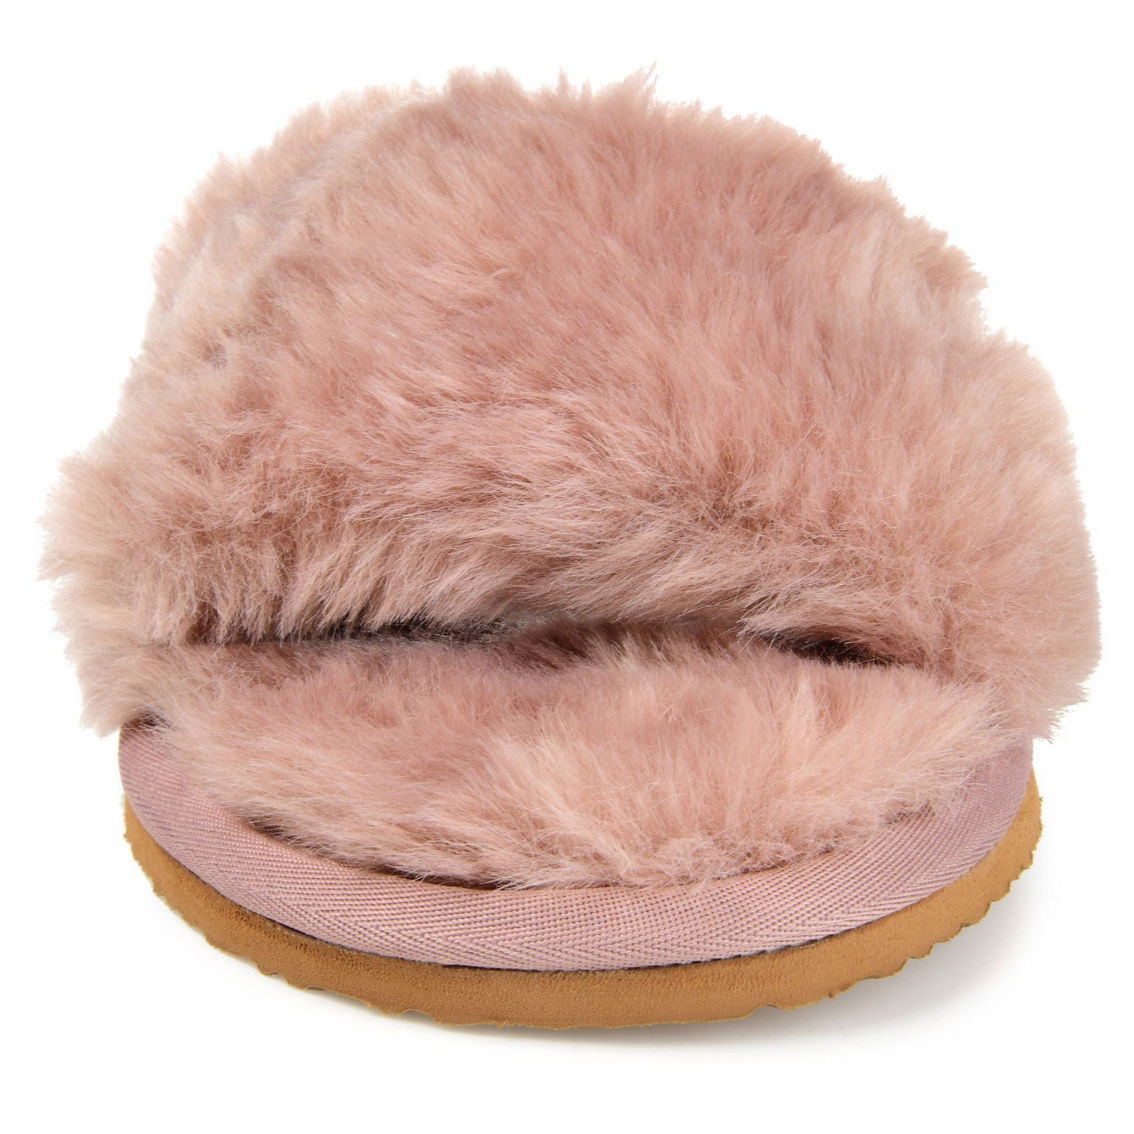 Journee Collection Women's Dawn Slipper - Image 2 of 5